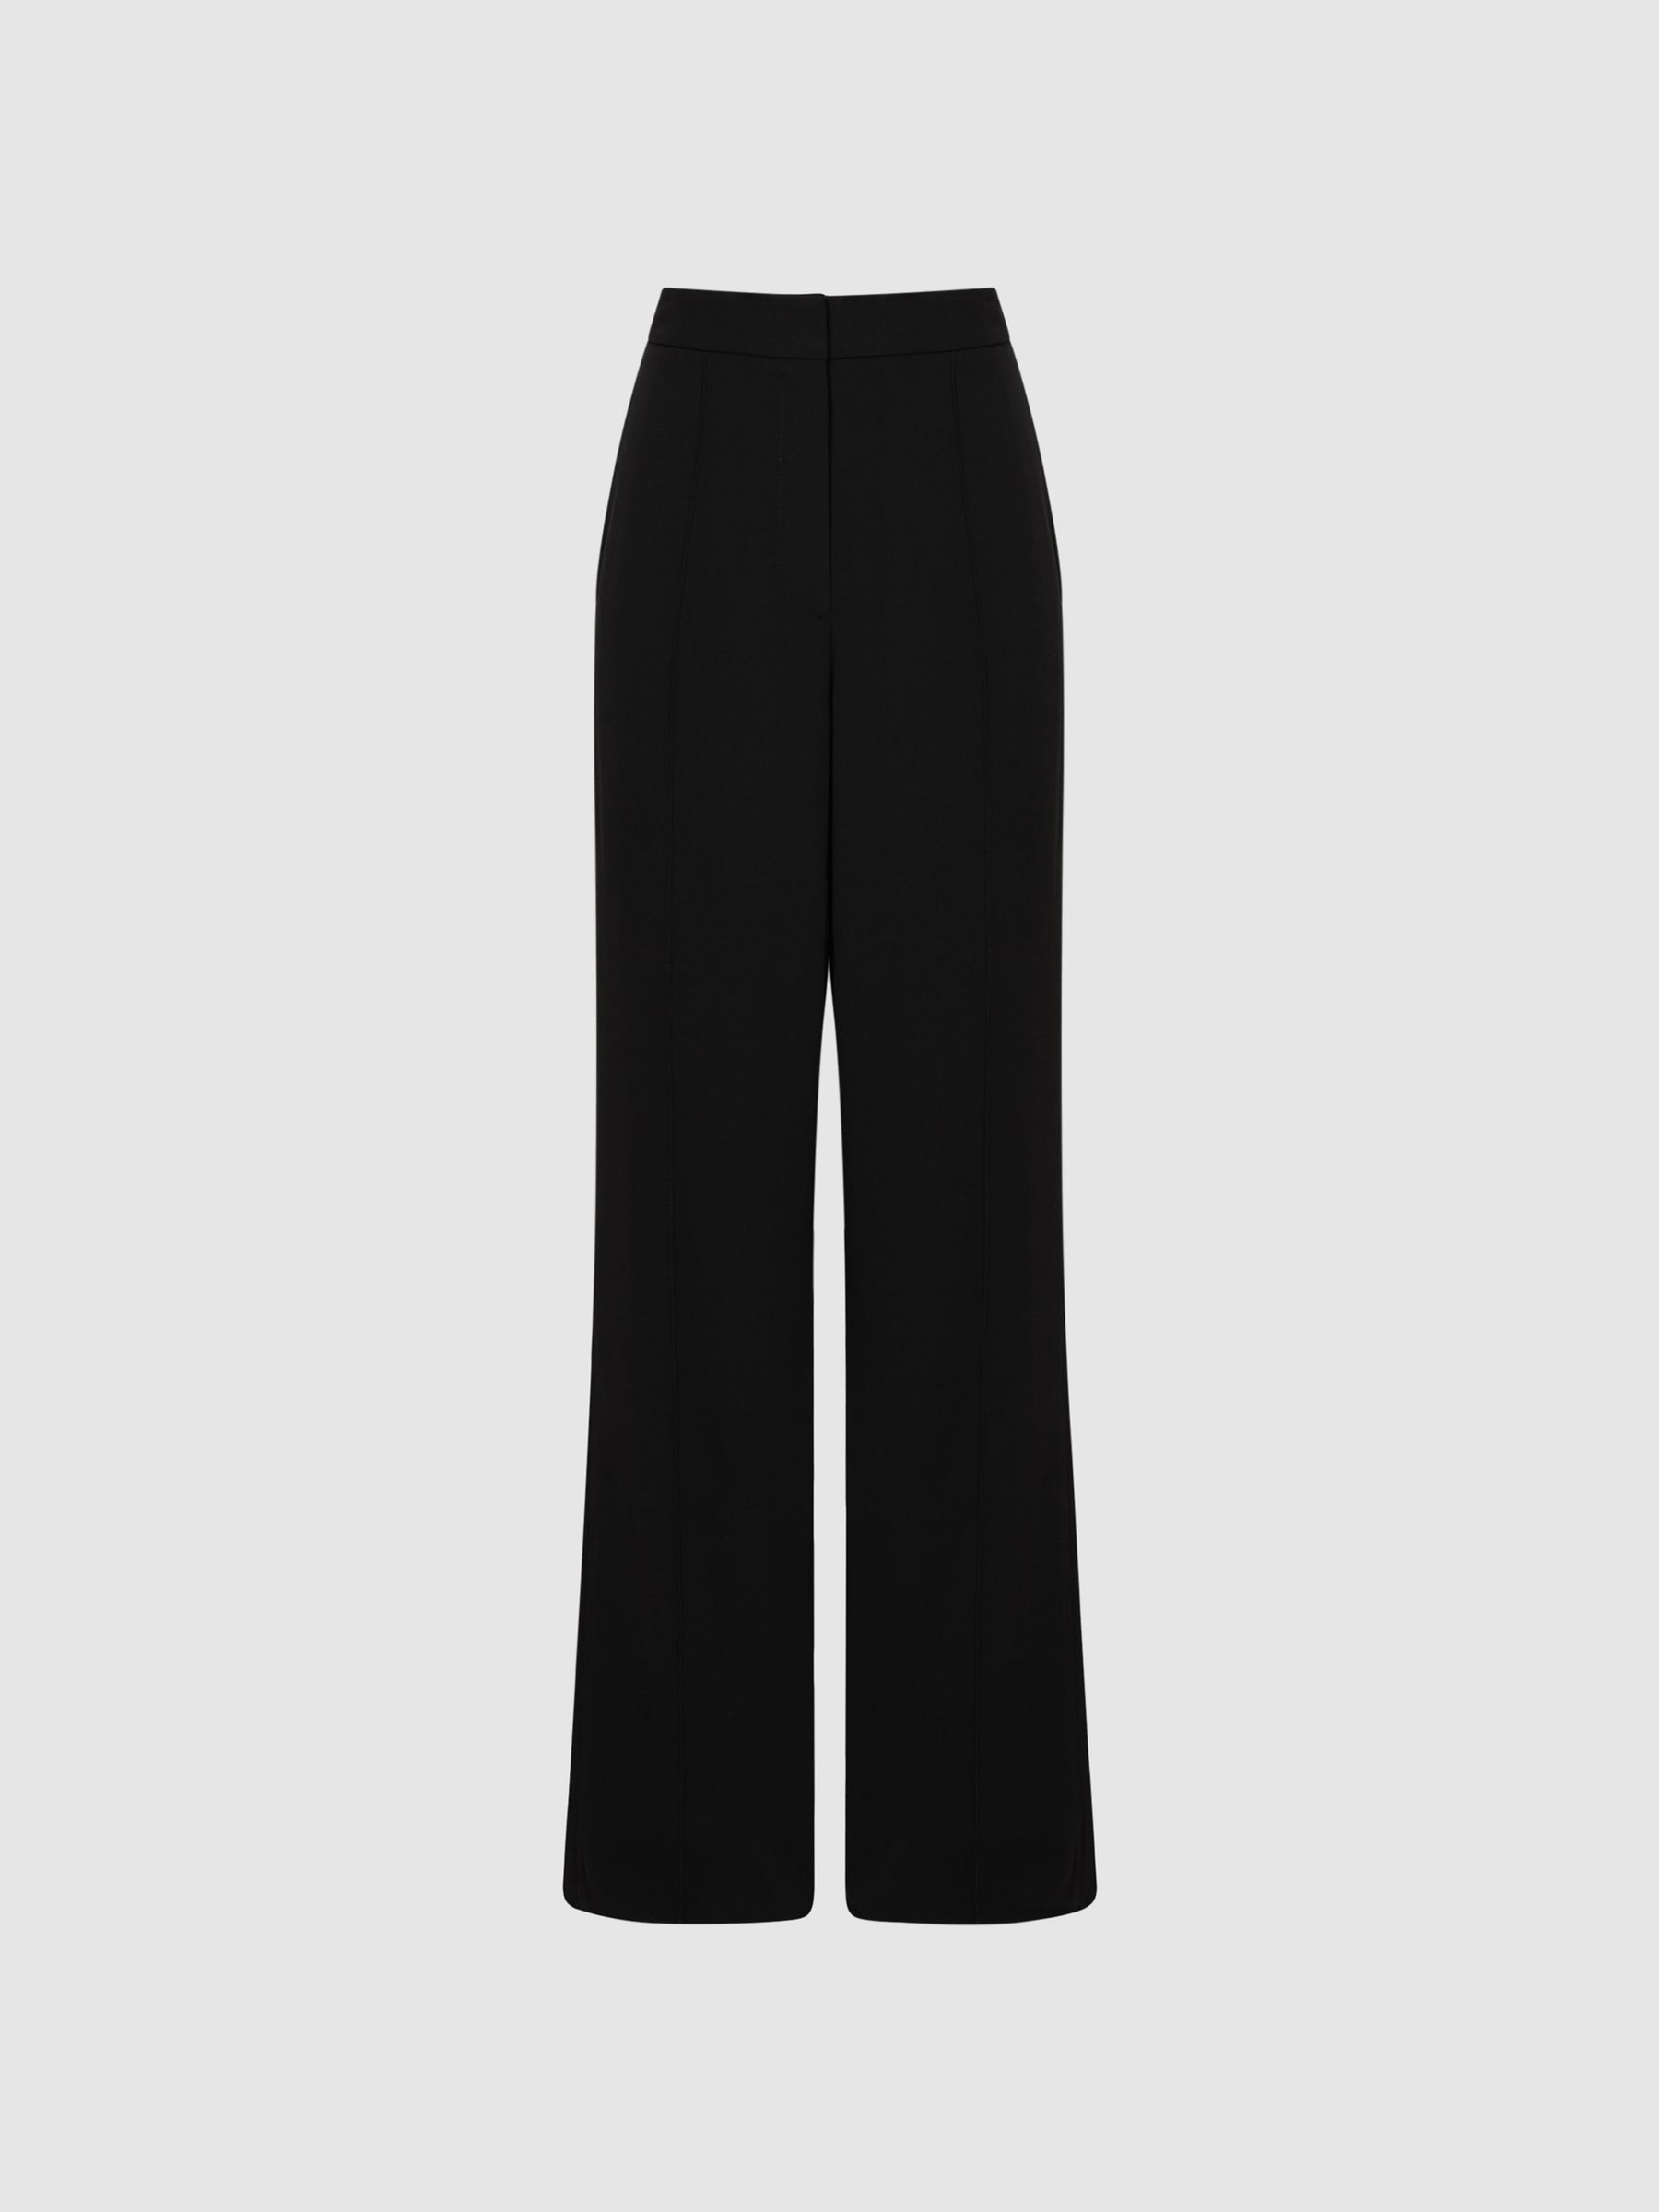 Reiss Aleah Pull On Trousers - REISS